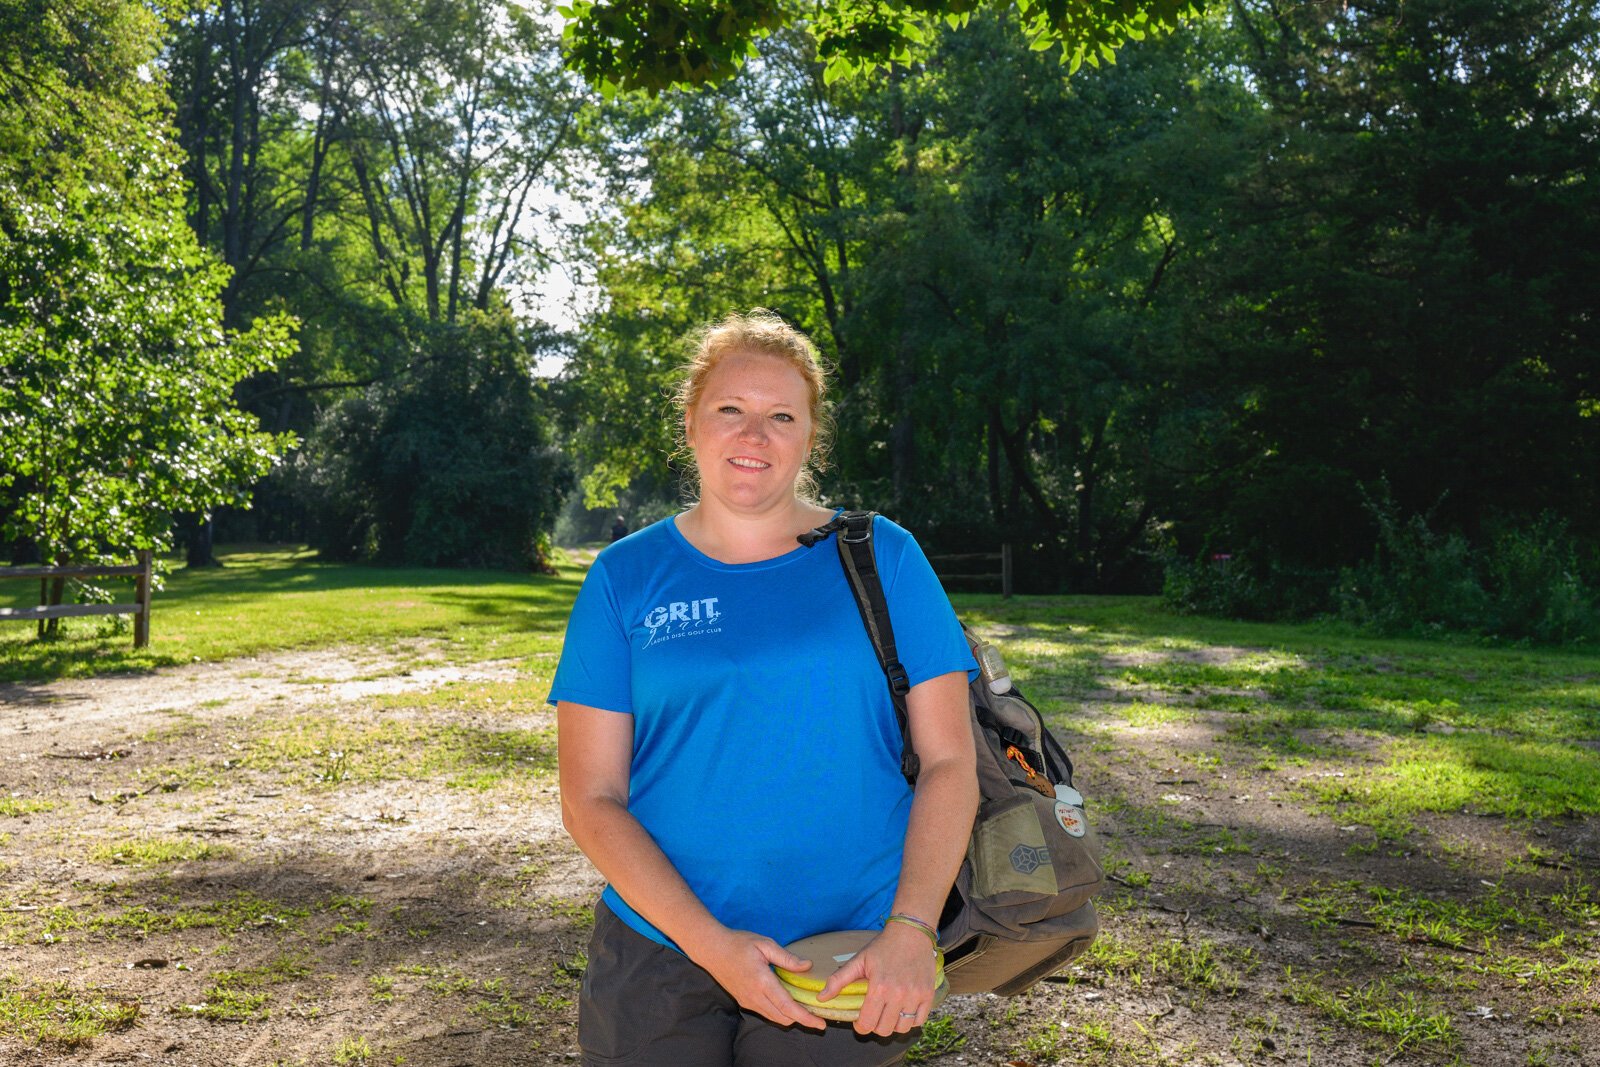 Grit and Grace Ladies Disc Golf Club director Jennifer Trombley at Red Hawk Disc Golf Course at Independence Lake County Park.